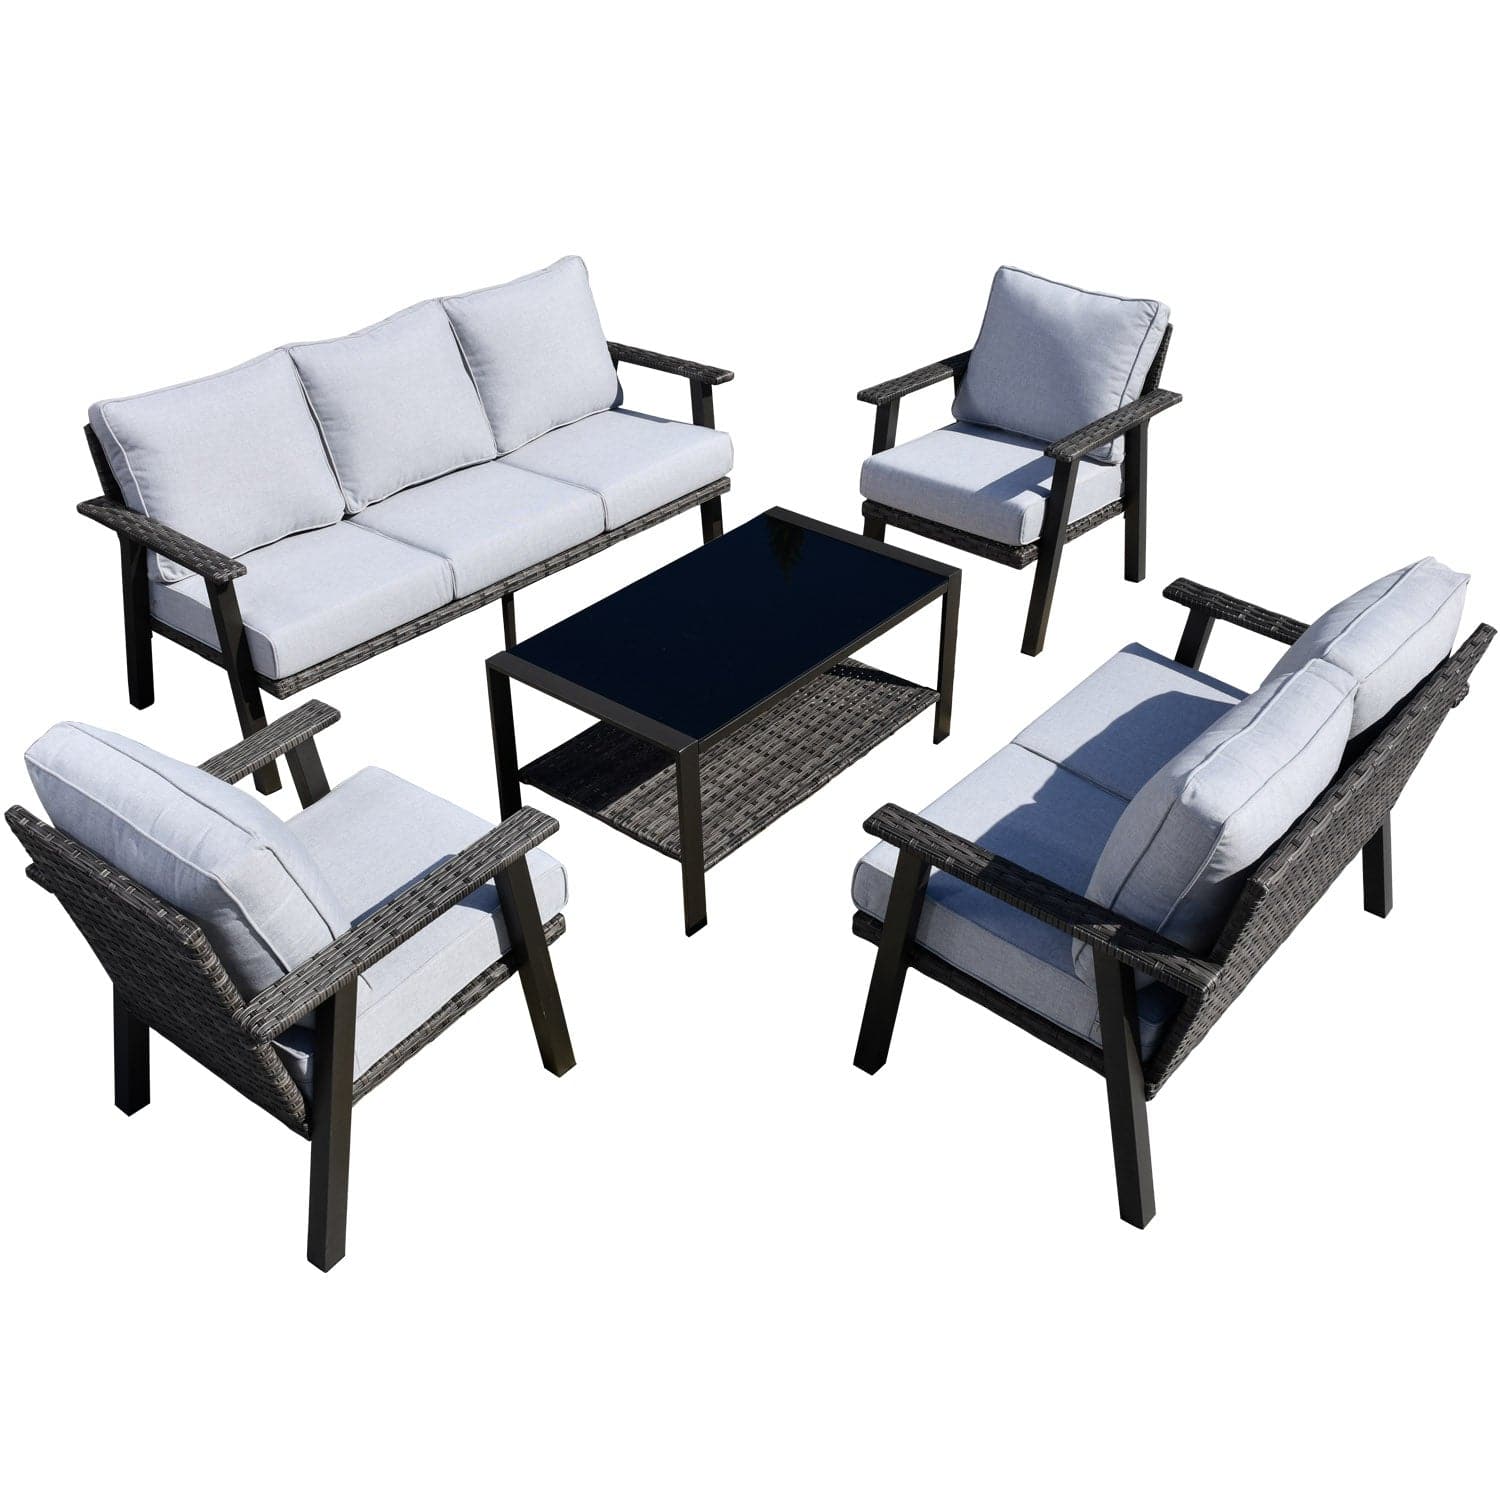 Ovios Patio Conversation Set 7 Person Seating with Table, 5''Cushion, Olefin Fabric